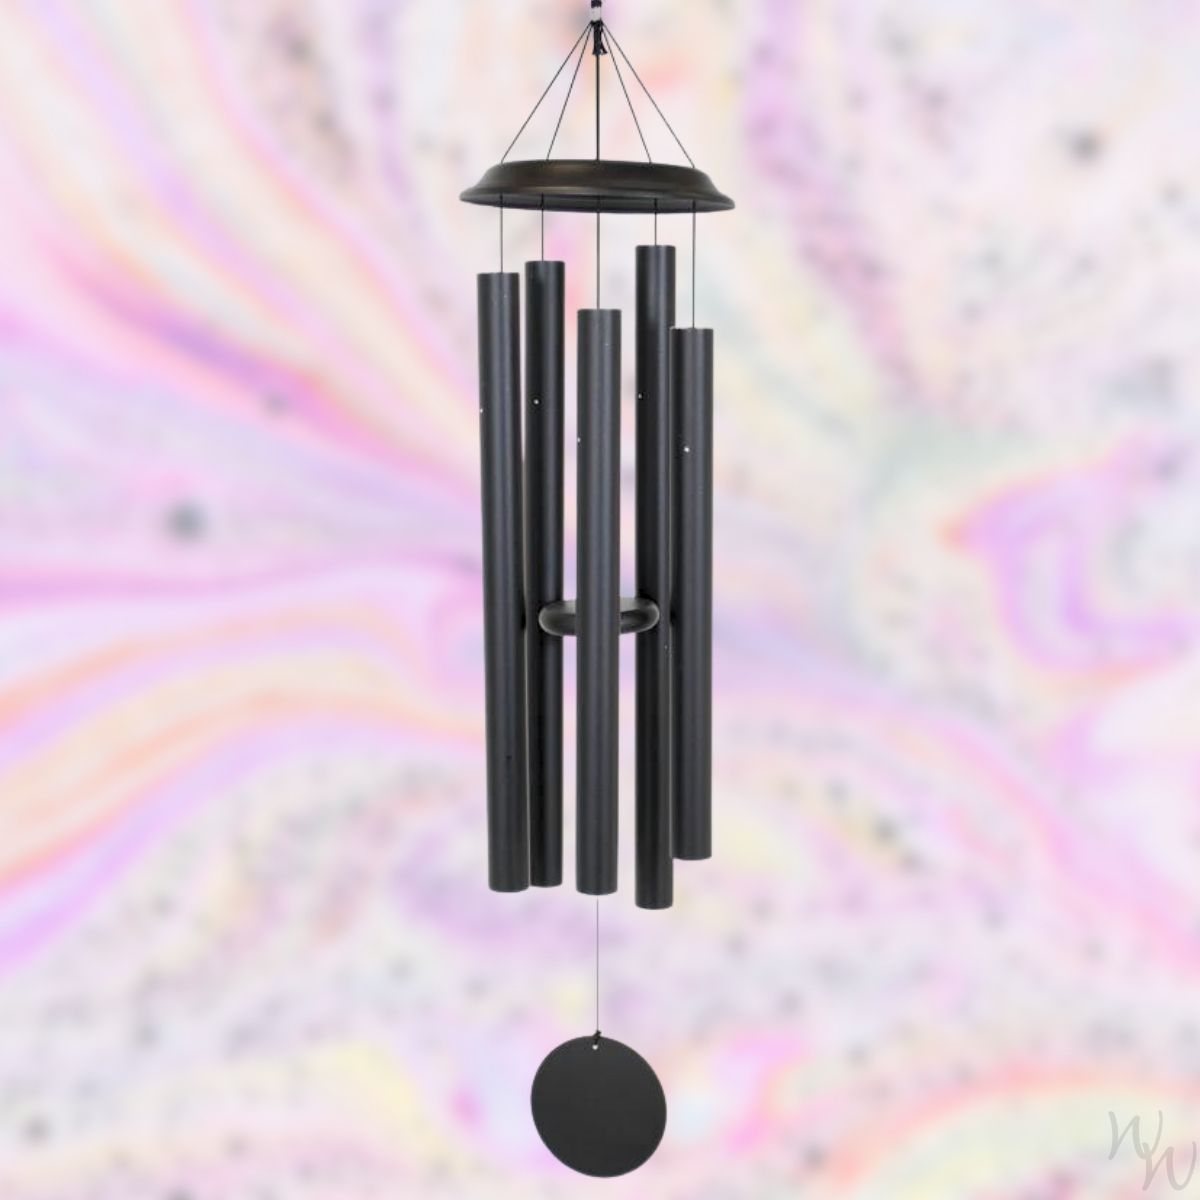 Shenandoah Melodies 59 Inch Black Wind Chime - Scale Of G